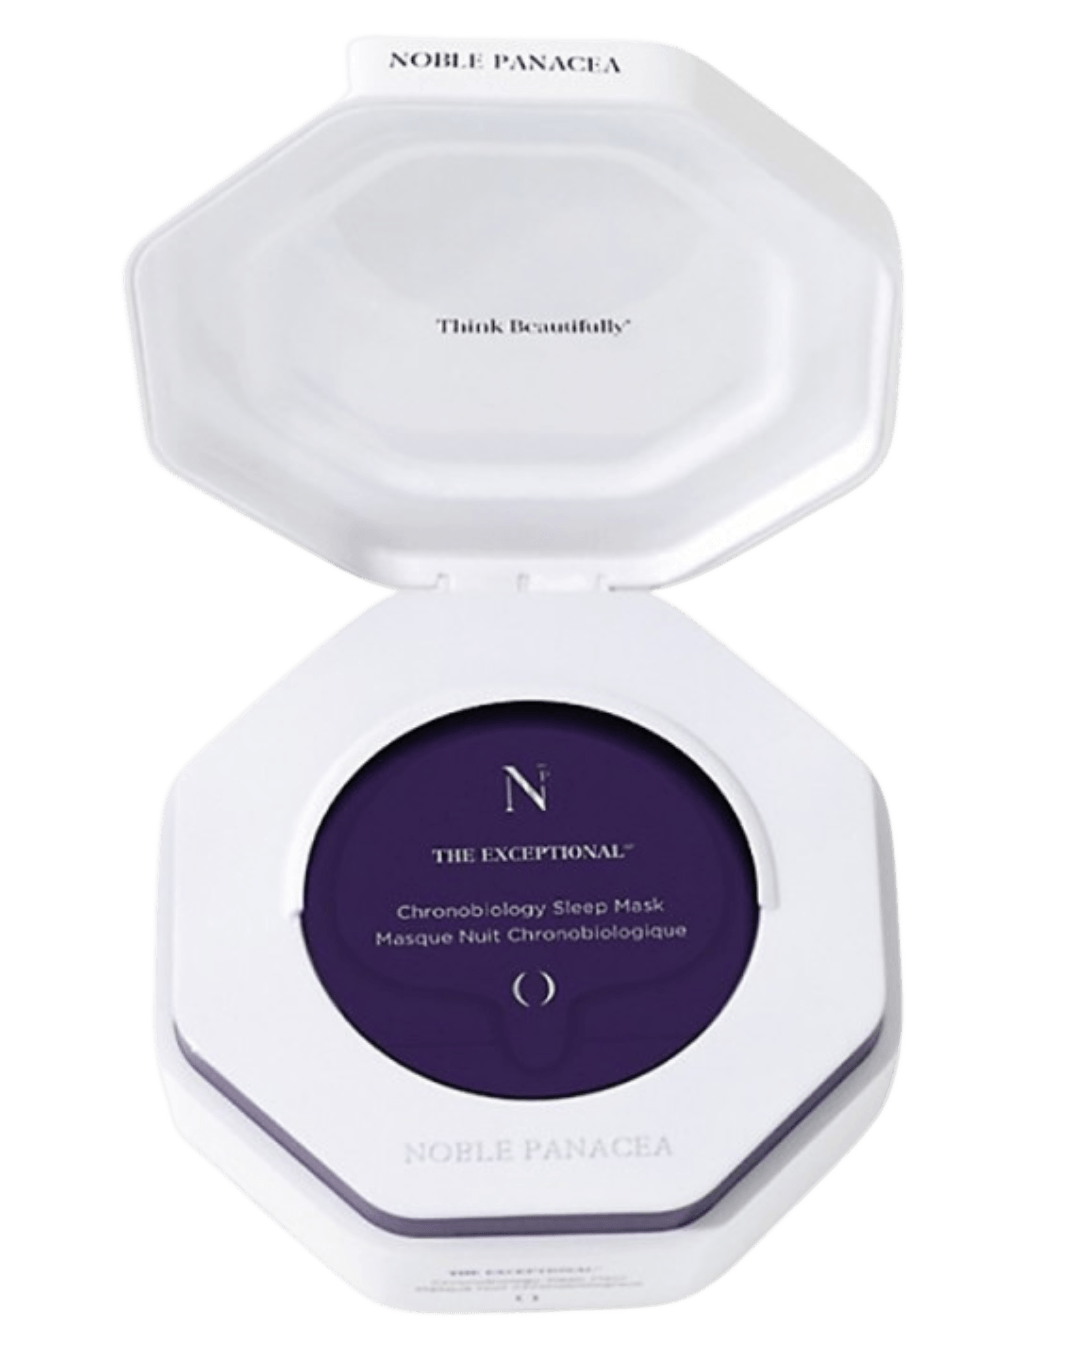 Daily Vanity Beauty Awards 2024 Best Skincare Noble Panacea Exceptional Chronobiology Sleep Mask Voted By Beauty Experts